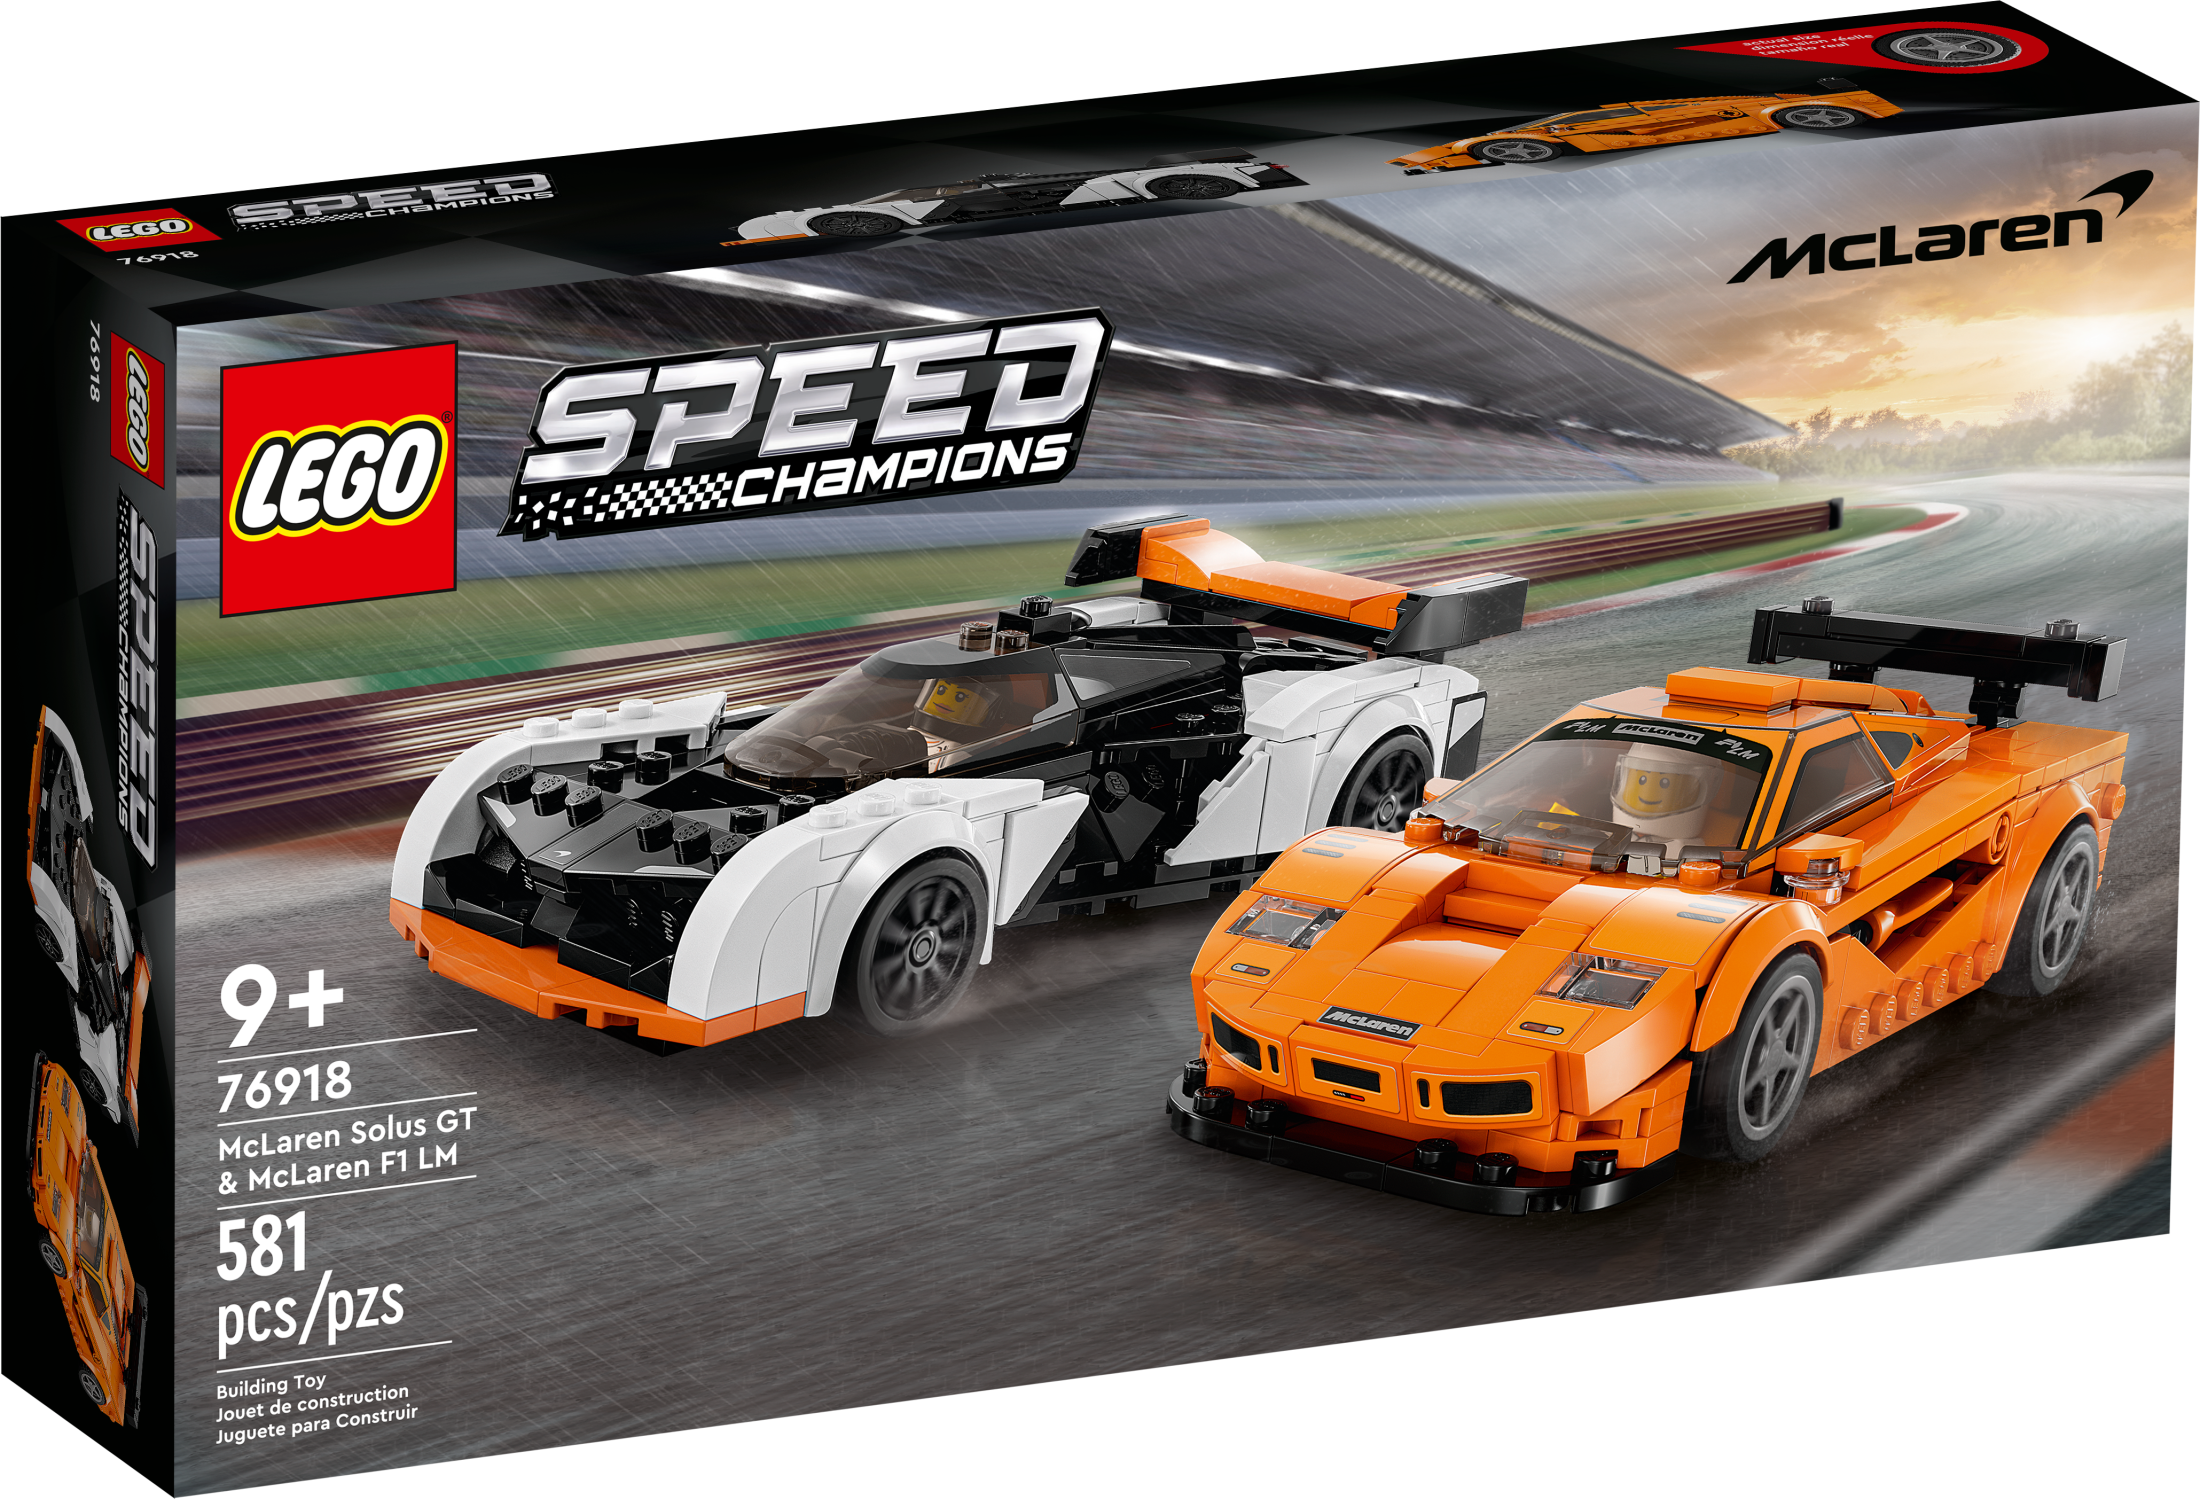 LEGO Speed Champions McLaren Solus GT & McLaren F1 LM 76918 , Featuring 2 Iconic Race Car Toys, Hypercar Model Building Kit, Collectible 2023 Set, Great Kid-Friendly Gift for Boys and Girls Ages 9+ - image 4 of 9